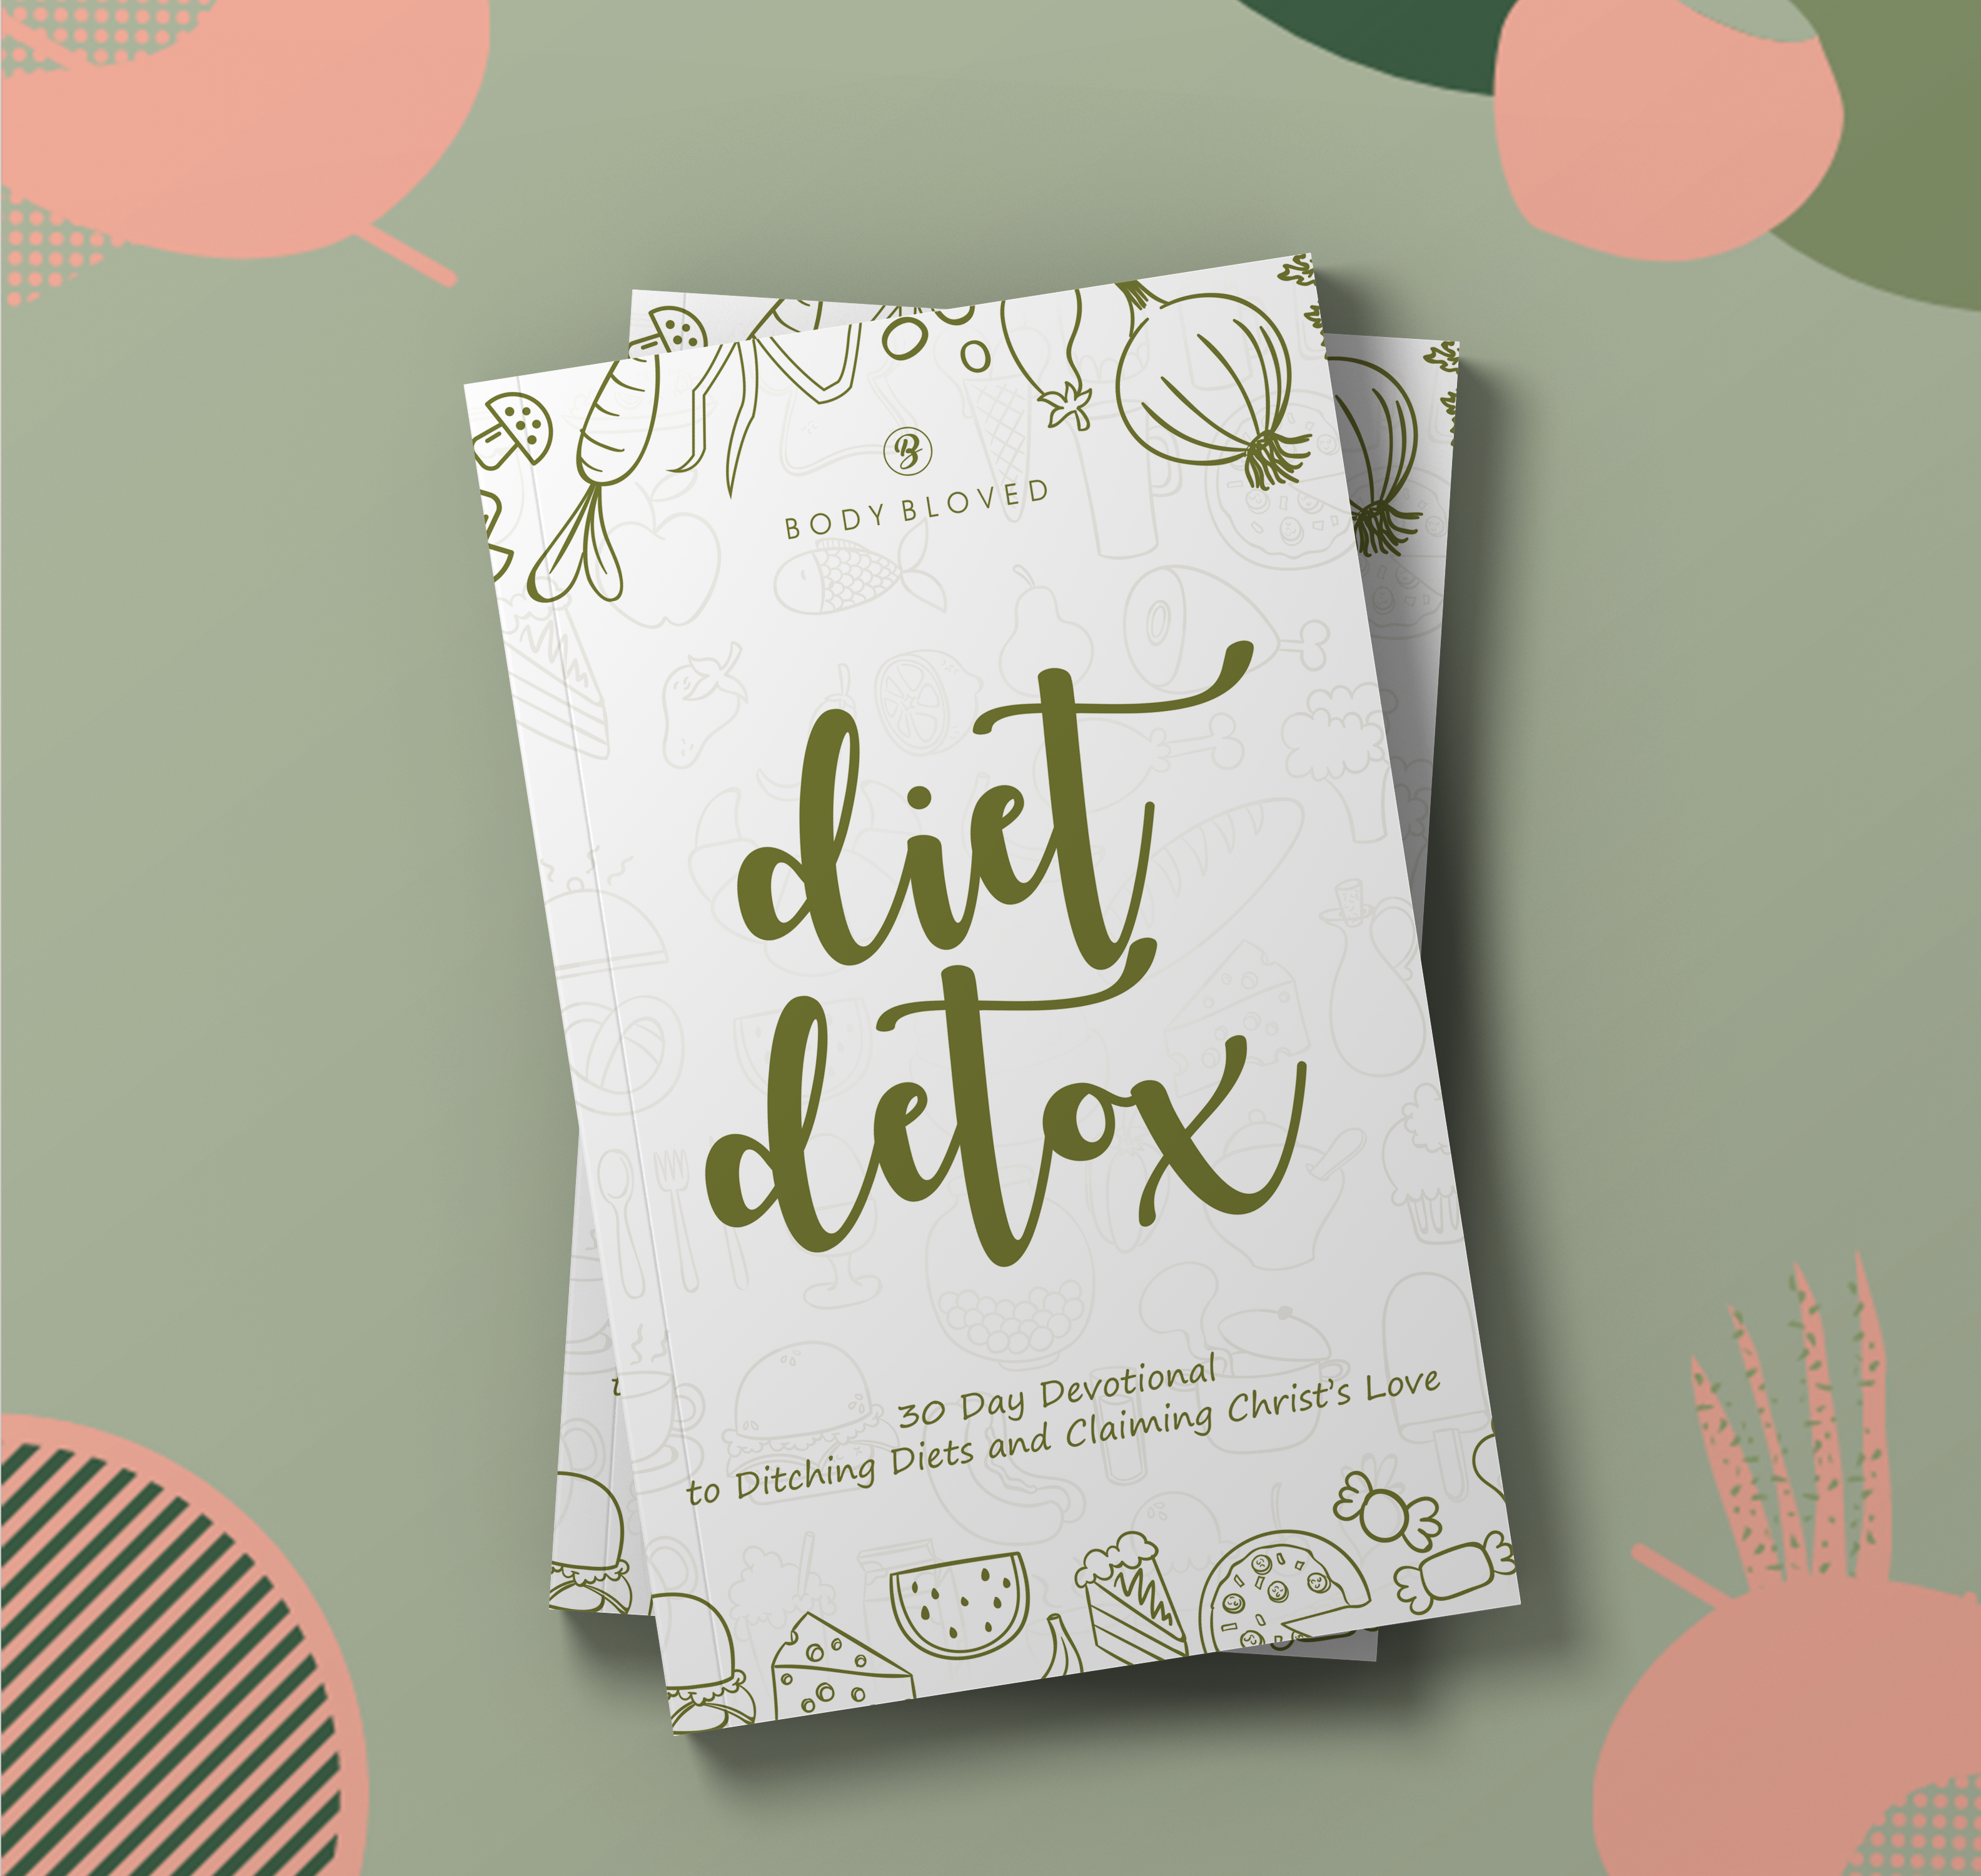 Diet Detox by Body BLoved best intuitive eating books for Christian Women